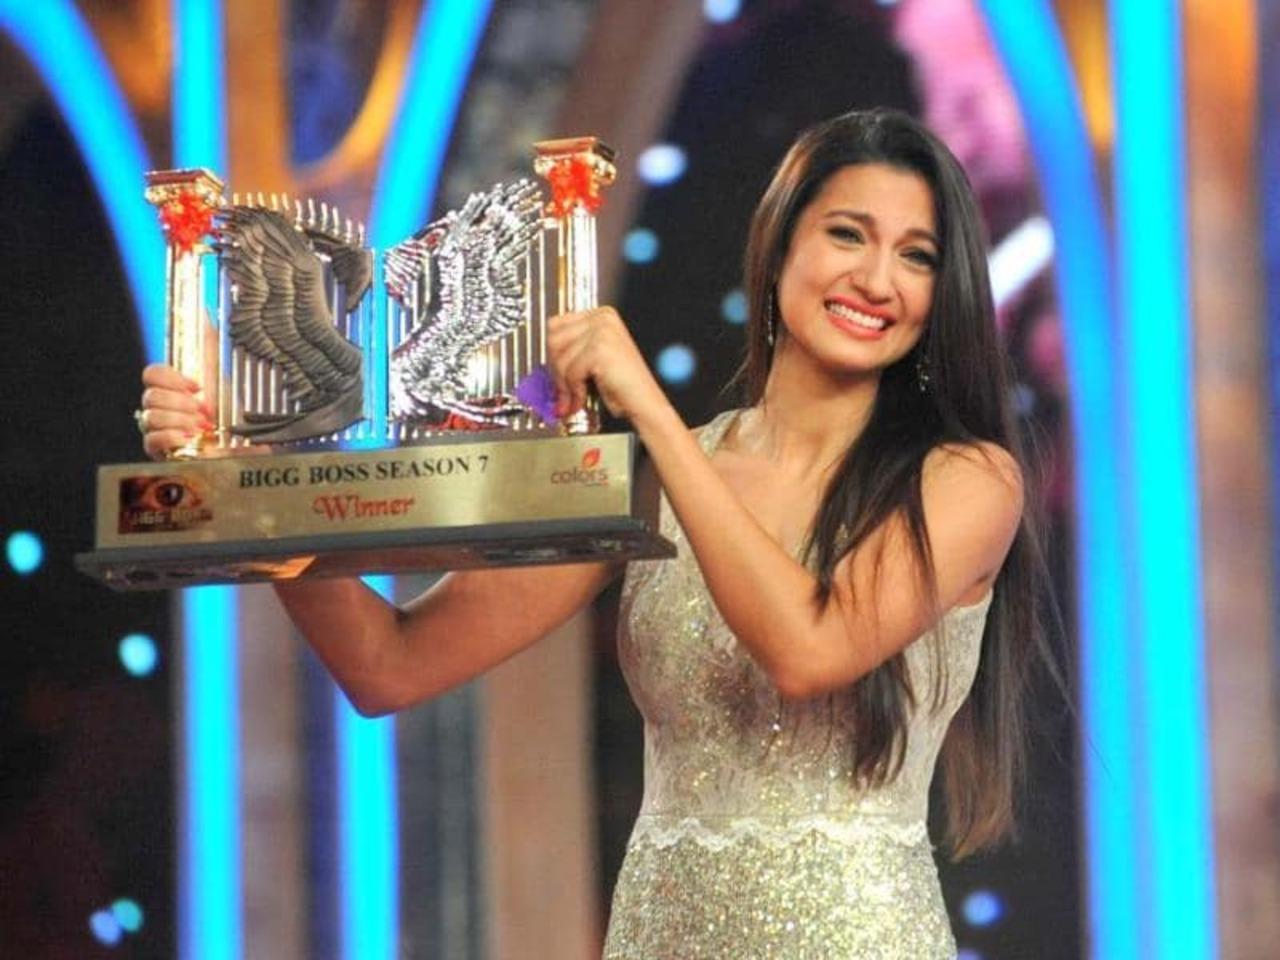 Bigg Boss Season 7 (2013) - Winner: Gauahar Khan
Gauahar Khan earned the Season 7 title with her style and spirit. She remains the most loved participant in Bigg Boss history